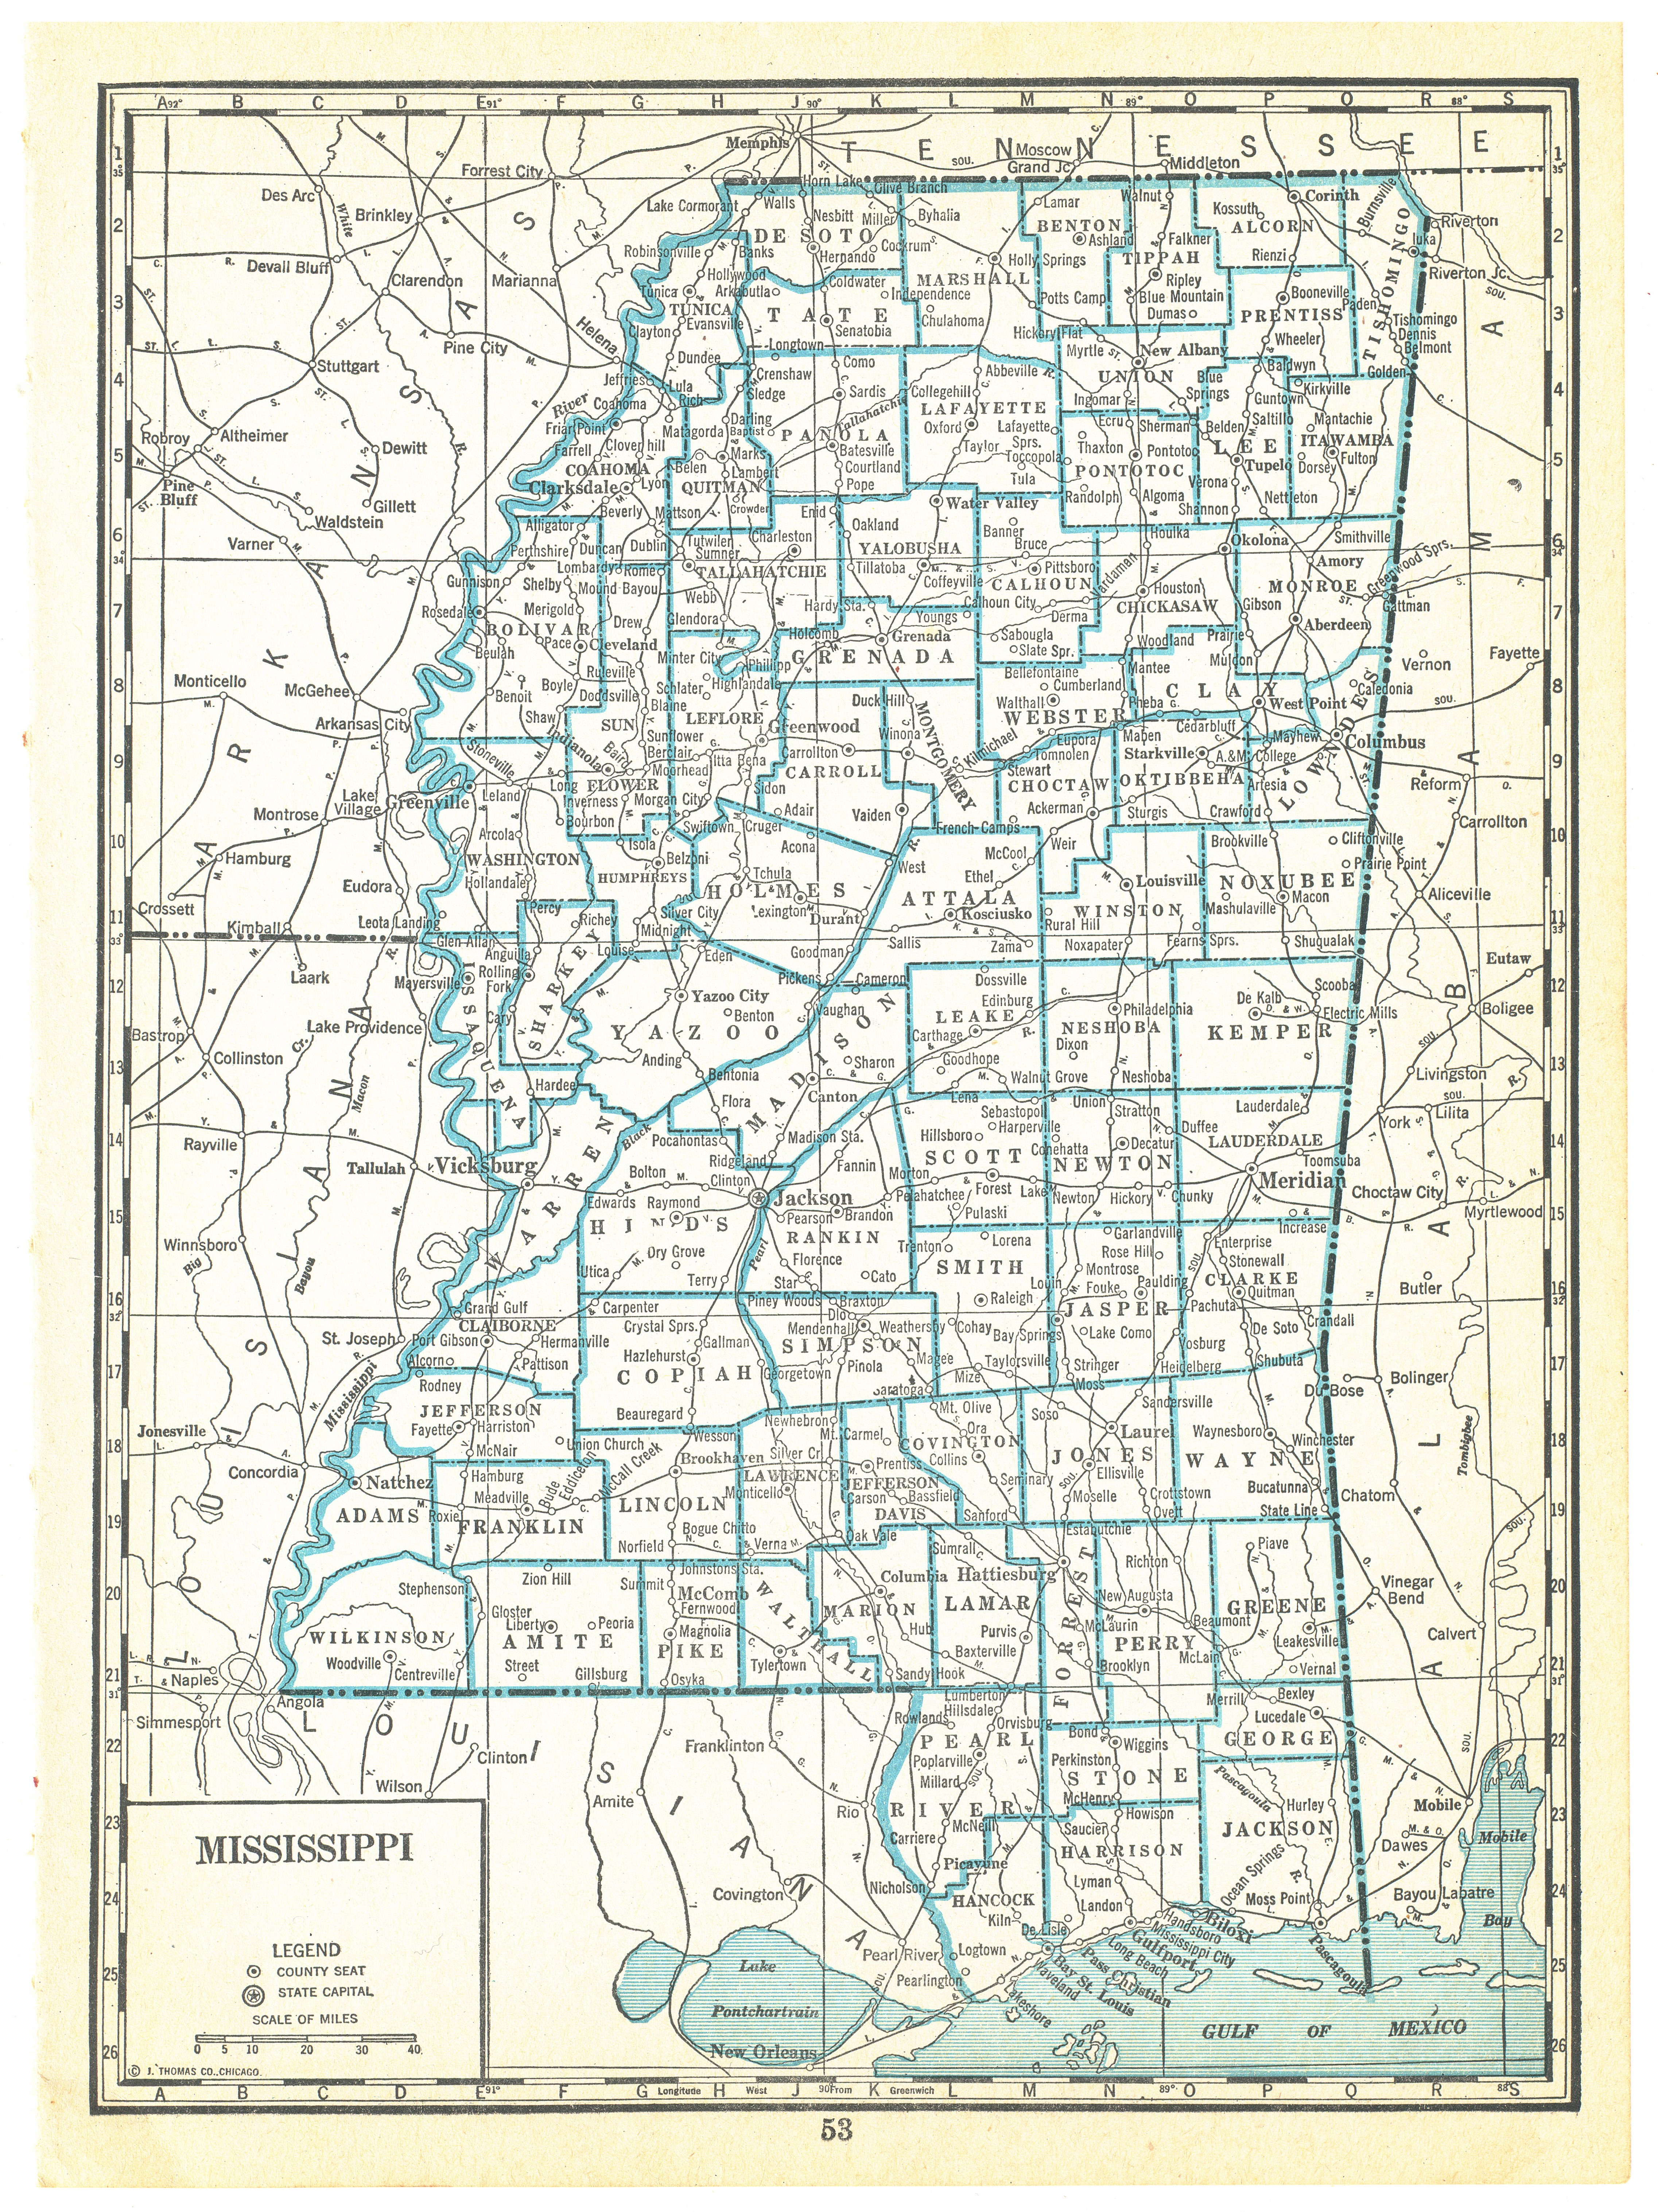 1940 Vintage Atlas Map Page - Mississippi on one side and Missouri on the oth...